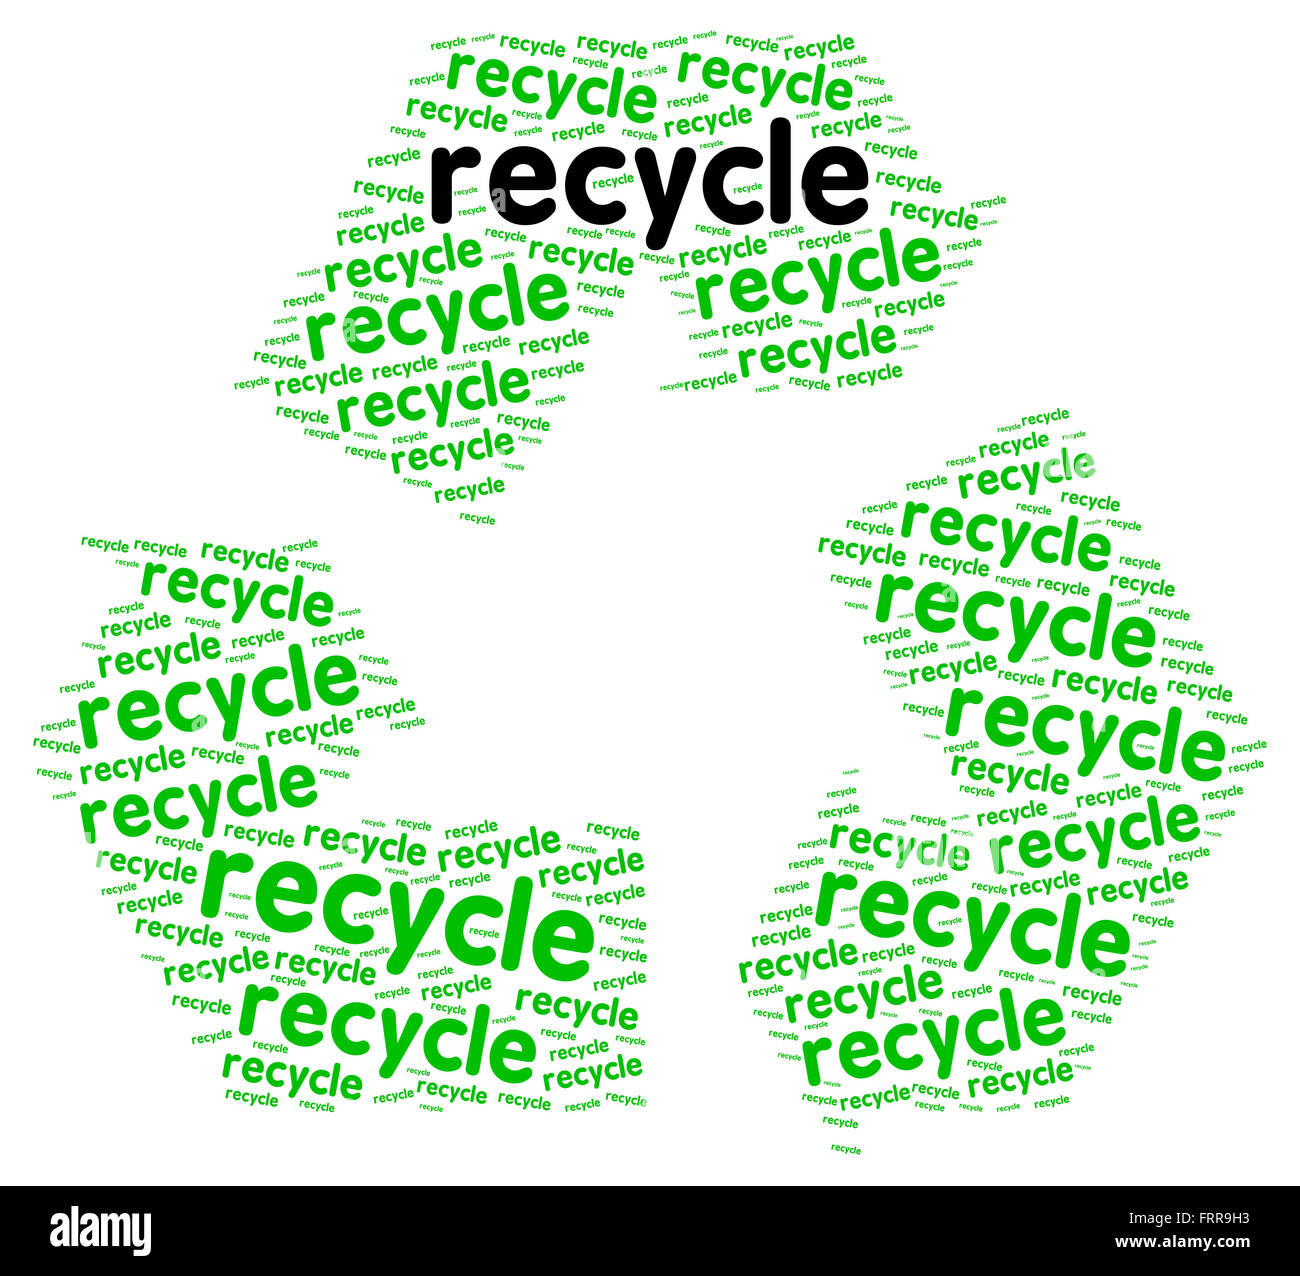 Recycle word cloud renewable energy concept isolated on white Stock Photo